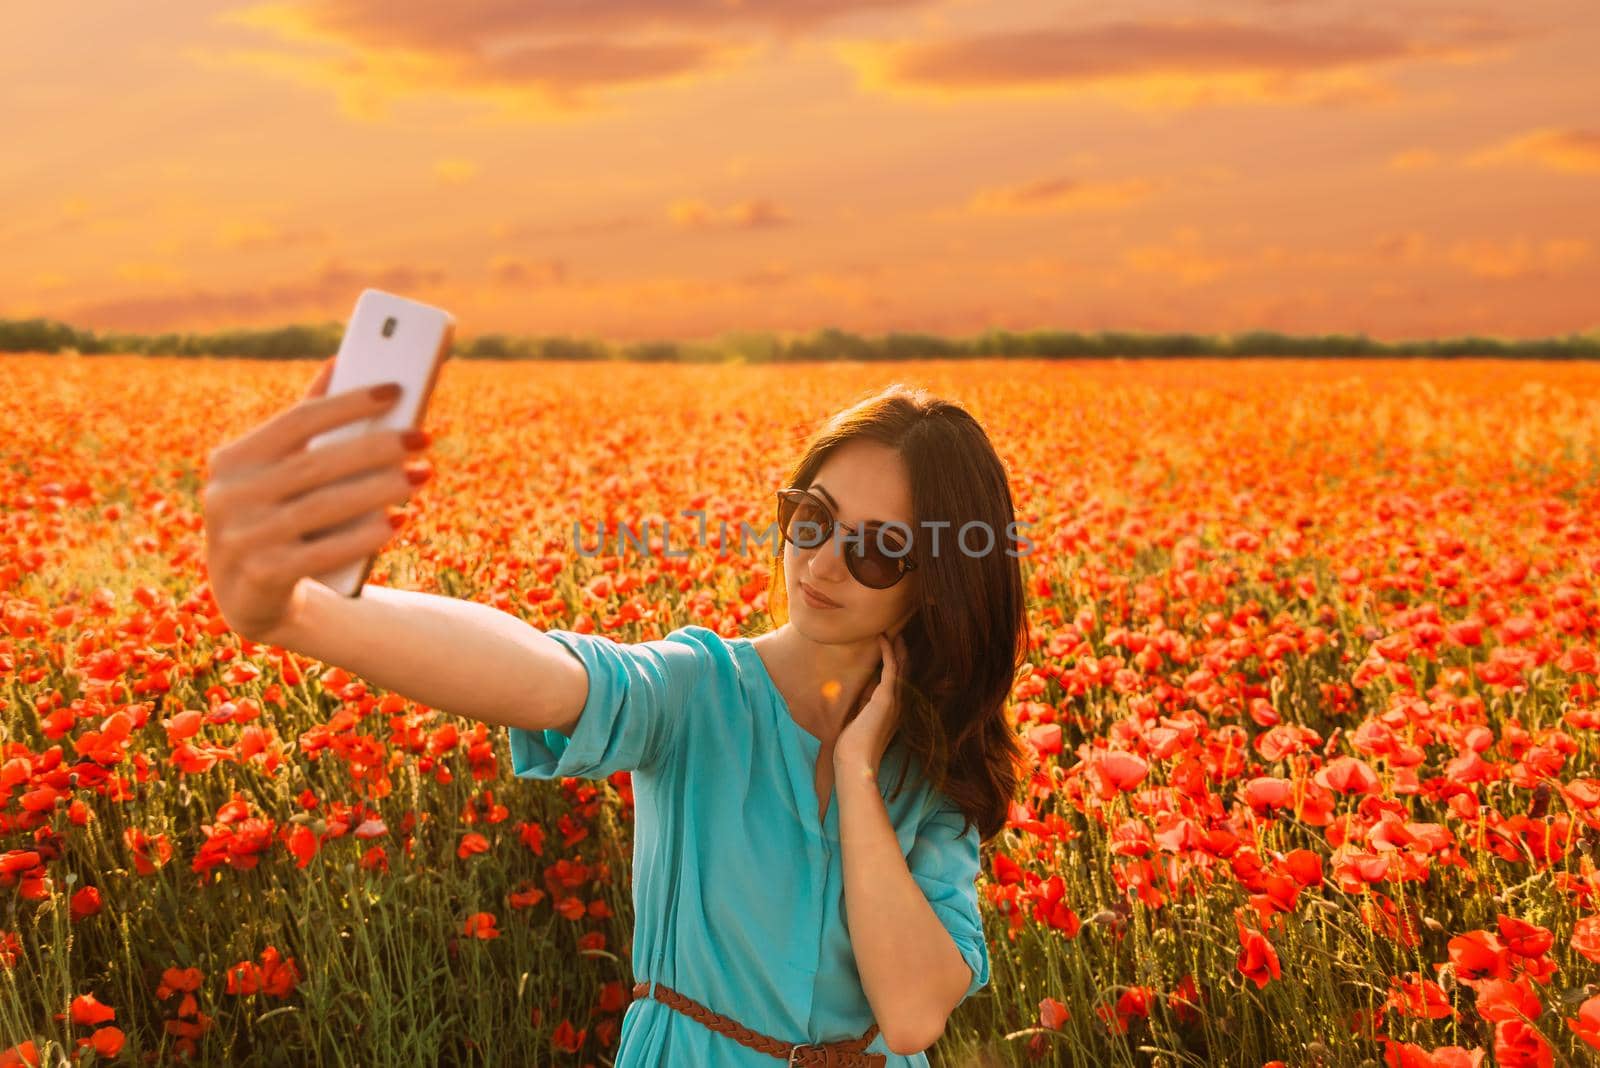 Beautiful young woman taking selfie with smartphone on background of red poppies meadow in summer at sunset.